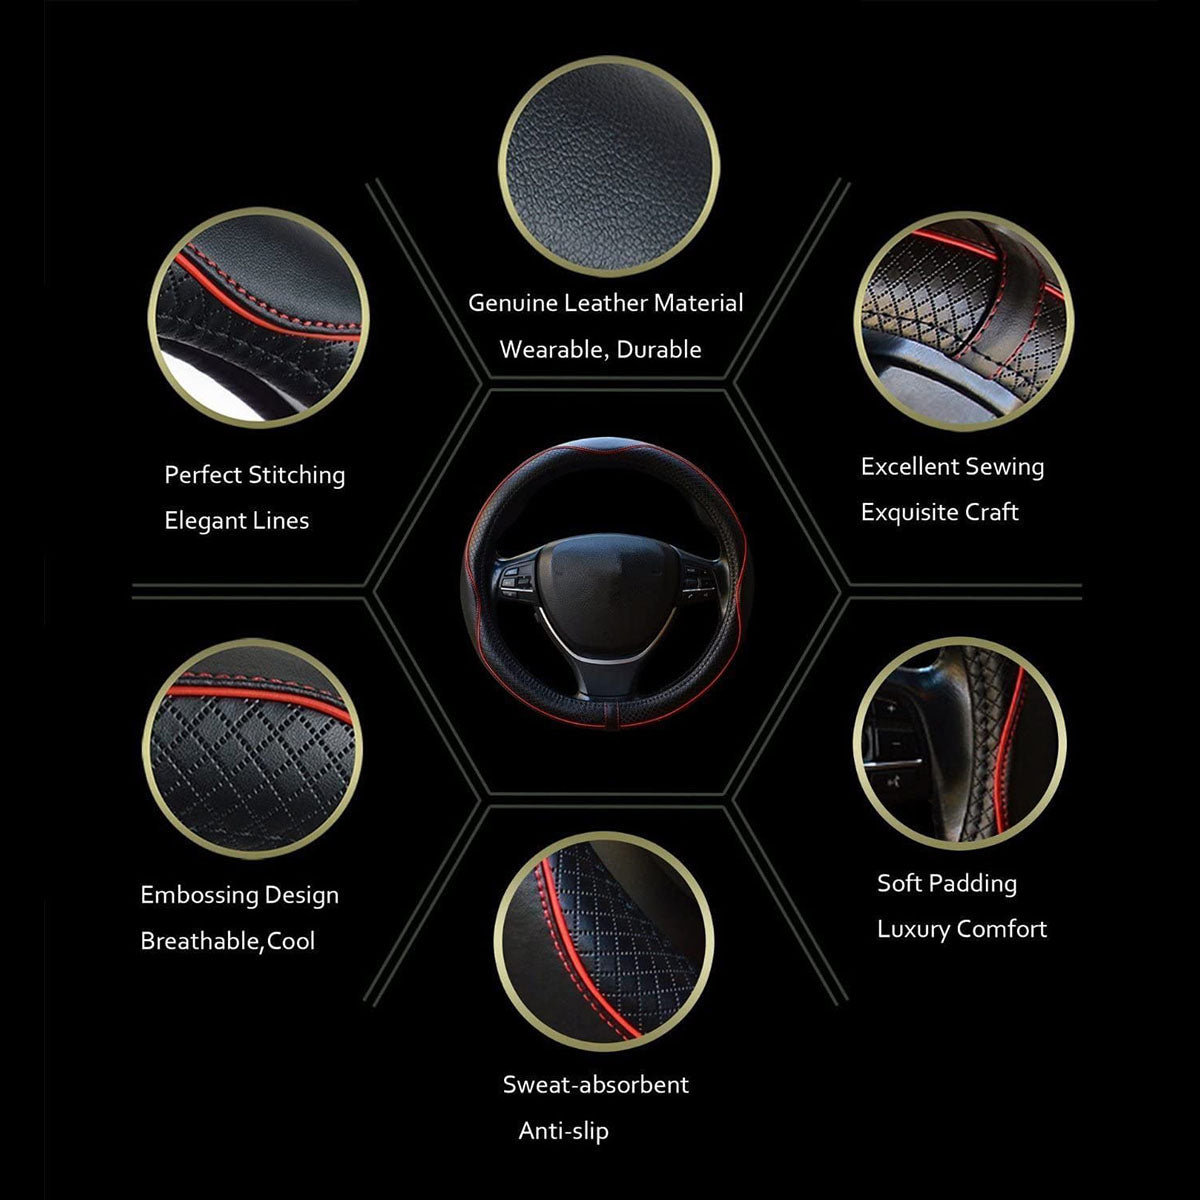 Car Steering Wheel Cover, Custom For Your Cars, Anti-Slip, Safety, Soft, Breathable, Heavy Duty, Thick, Full Surround, Sports Style, Car Accessories LI18990